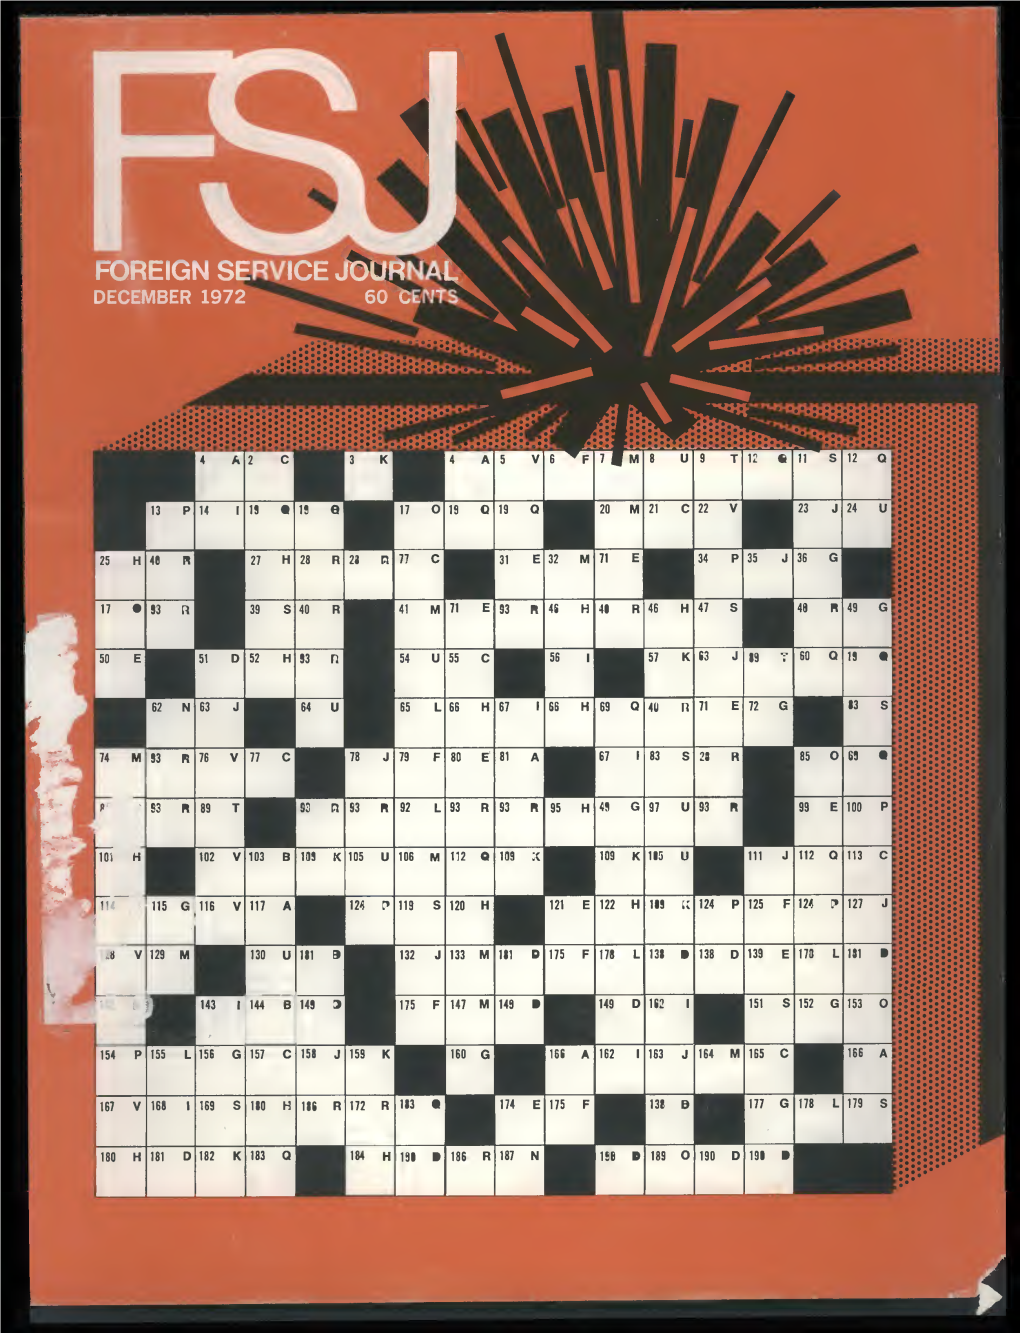 The Foreign Service Journal, December 1972